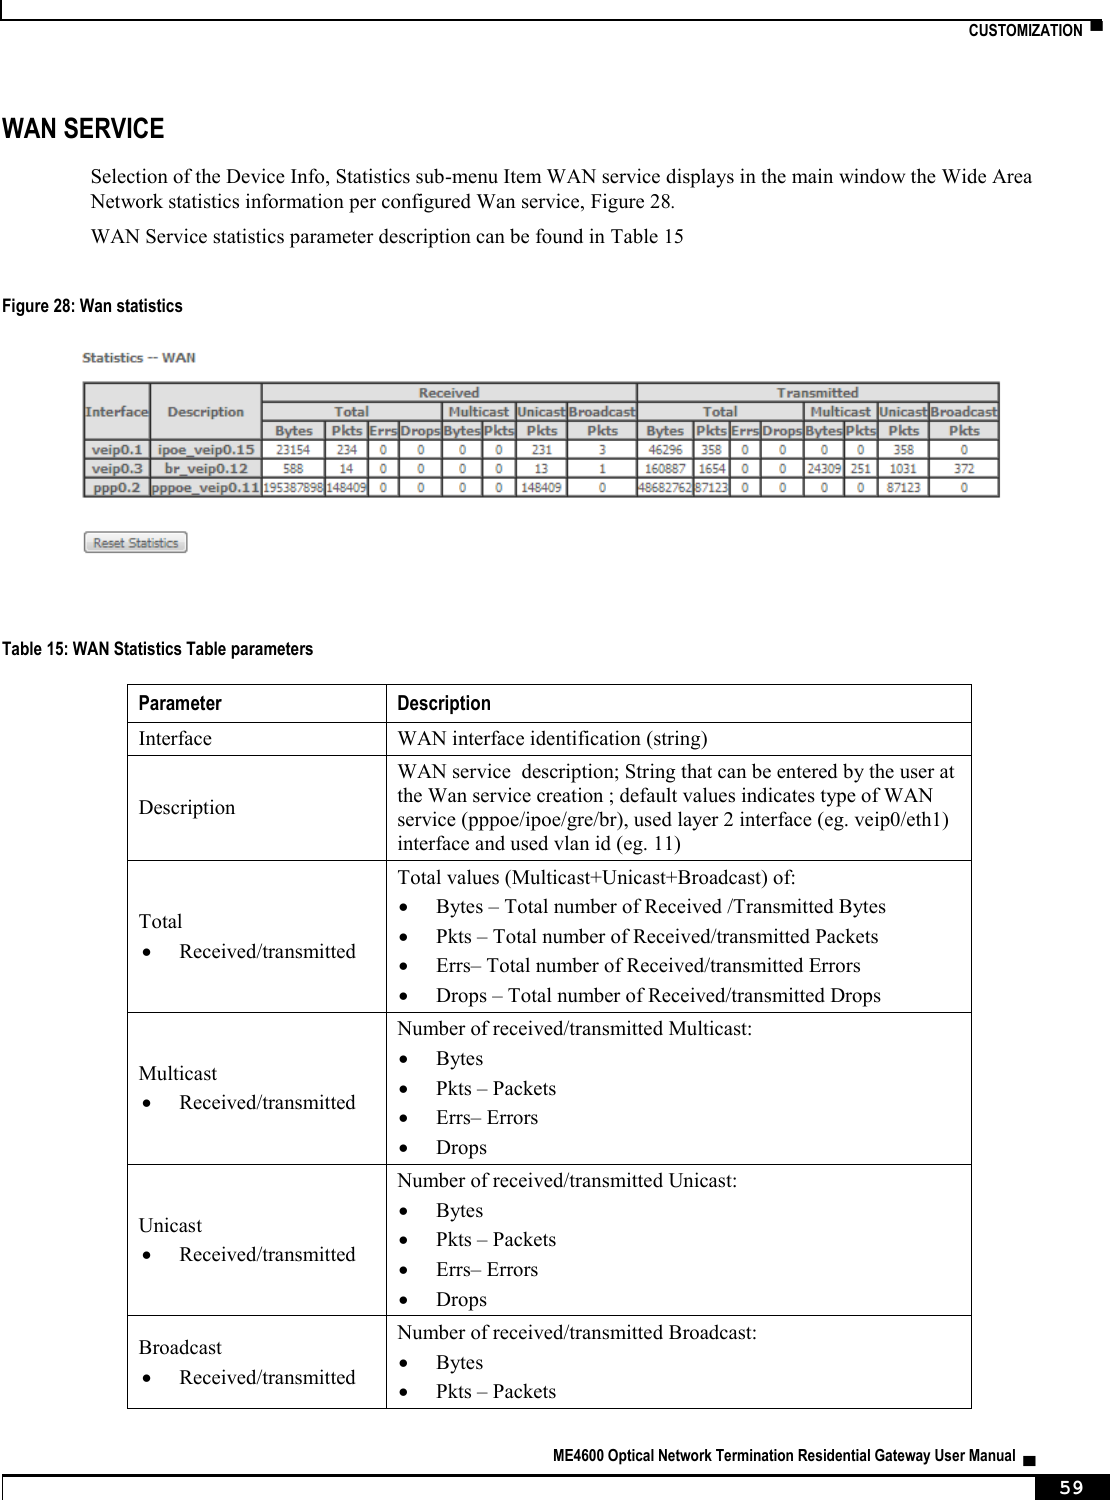    CUSTOMIZATION  ▀   ME4600 Optical Network Termination Residential Gateway User Manual  ▄     59 WAN SERVICE Selection of the Device Info, Statistics sub-menu Item WAN service displays in the main window the Wide Area Network statistics information per configured Wan service, Figure 28.  WAN Service statistics parameter description can be found in Table 15  Figure 28: Wan statistics    Table 15: WAN Statistics Table parameters Parameter Description Interface WAN interface identification (string) Description WAN service  description; String that can be entered by the user at the Wan service creation ; default values indicates type of WAN service (pppoe/ipoe/gre/br), used layer 2 interface (eg. veip0/eth1) interface and used vlan id (eg. 11) Total  Received/transmitted Total values (Multicast+Unicast+Broadcast) of:  Bytes – Total number of Received /Transmitted Bytes   Pkts – Total number of Received/transmitted Packets  Errs– Total number of Received/transmitted Errors  Drops – Total number of Received/transmitted Drops Multicast  Received/transmitted Number of received/transmitted Multicast:   Bytes   Pkts – Packets  Errs– Errors  Drops Unicast  Received/transmitted Number of received/transmitted Unicast:   Bytes   Pkts – Packets  Errs– Errors  Drops Broadcast  Received/transmitted Number of received/transmitted Broadcast:   Bytes   Pkts – Packets 